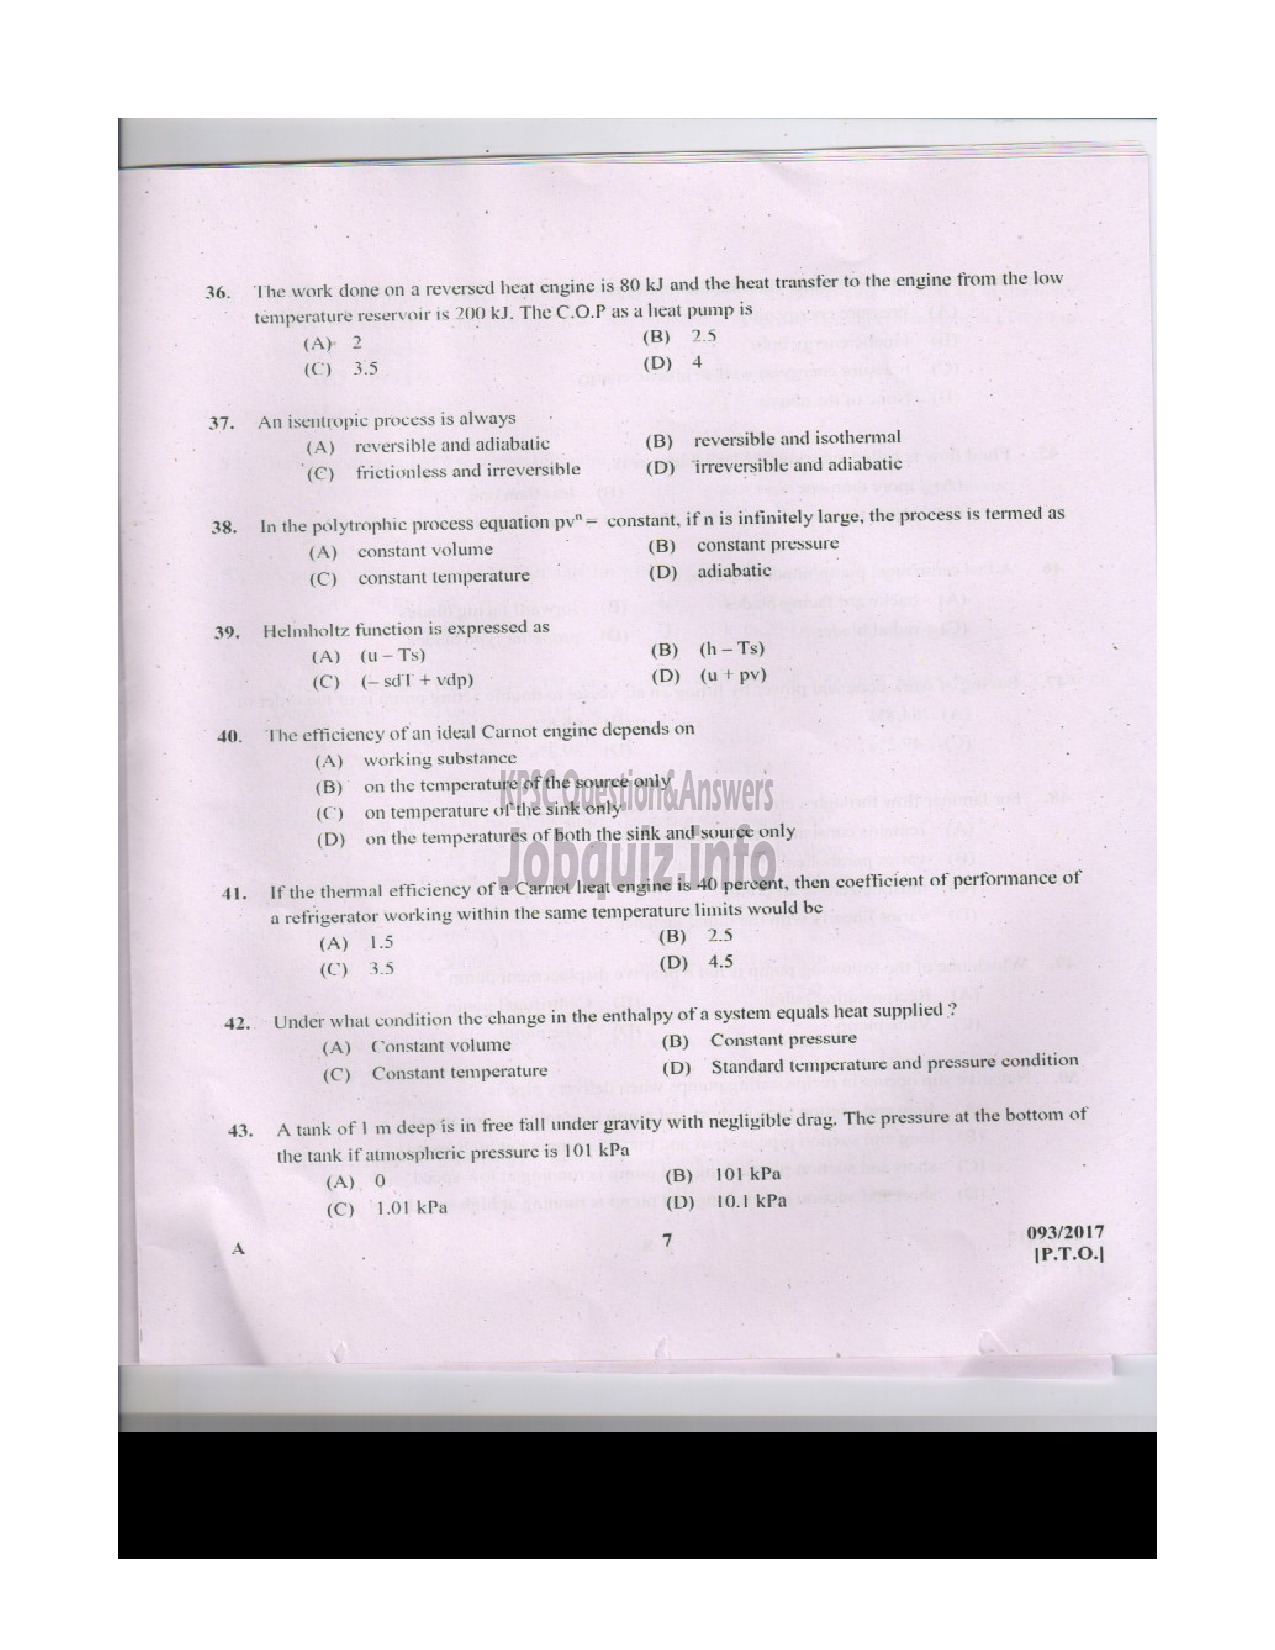 Kerala PSC Question Paper - INSTRUCTOR GRADE I MECHANICAL ENGINEERING ENGINEERING COLLEGES-6